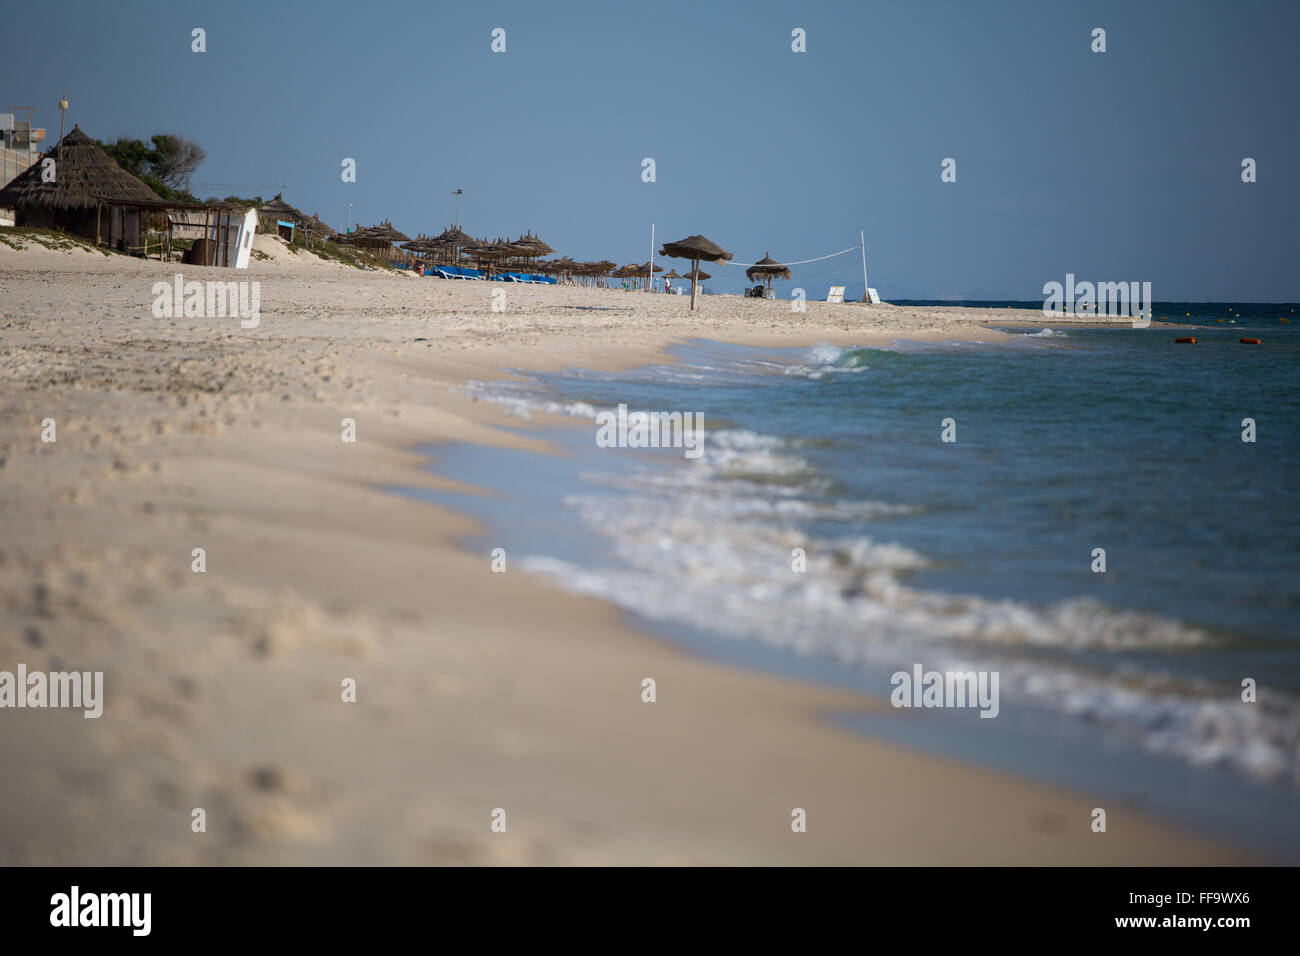 Morning view of a beach in Tunisia, water's edge in the foreground, beach umbrellas and chairs far in the distance Stock Photo